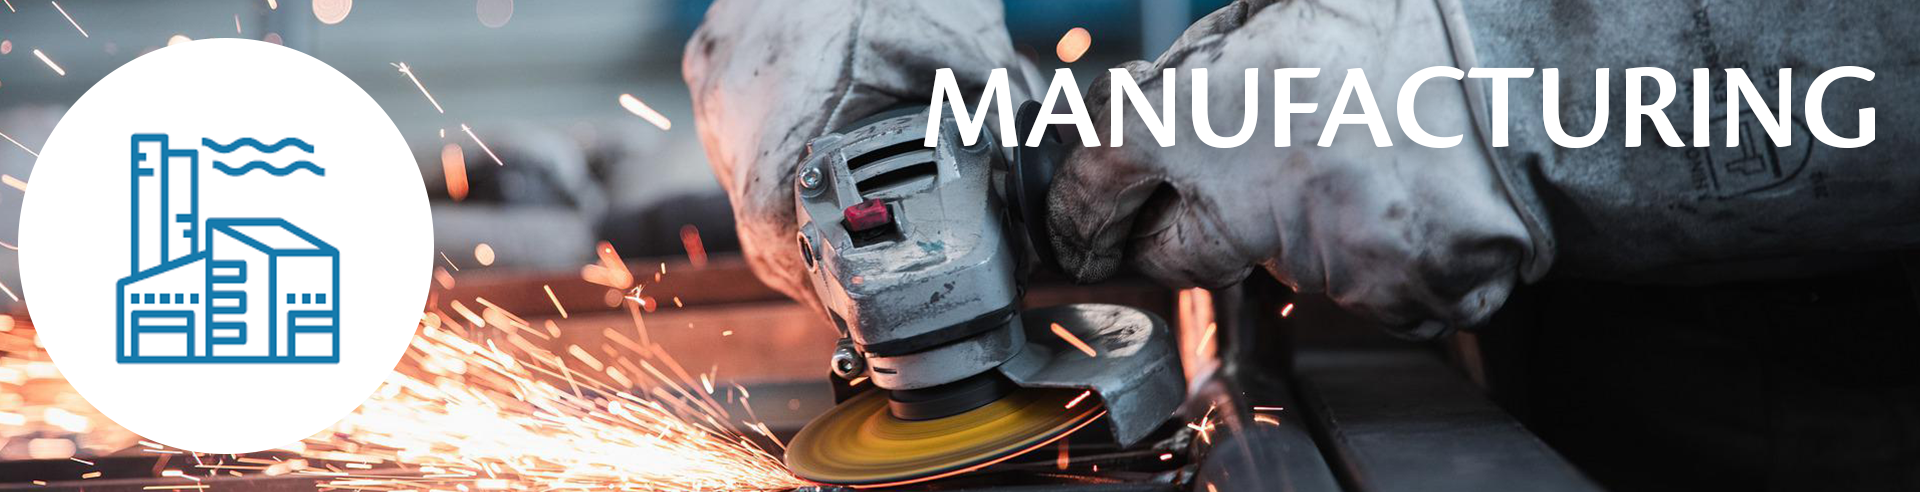 Manufacturing - Our Economy Website Header - image of person grinding metal with sparks flying